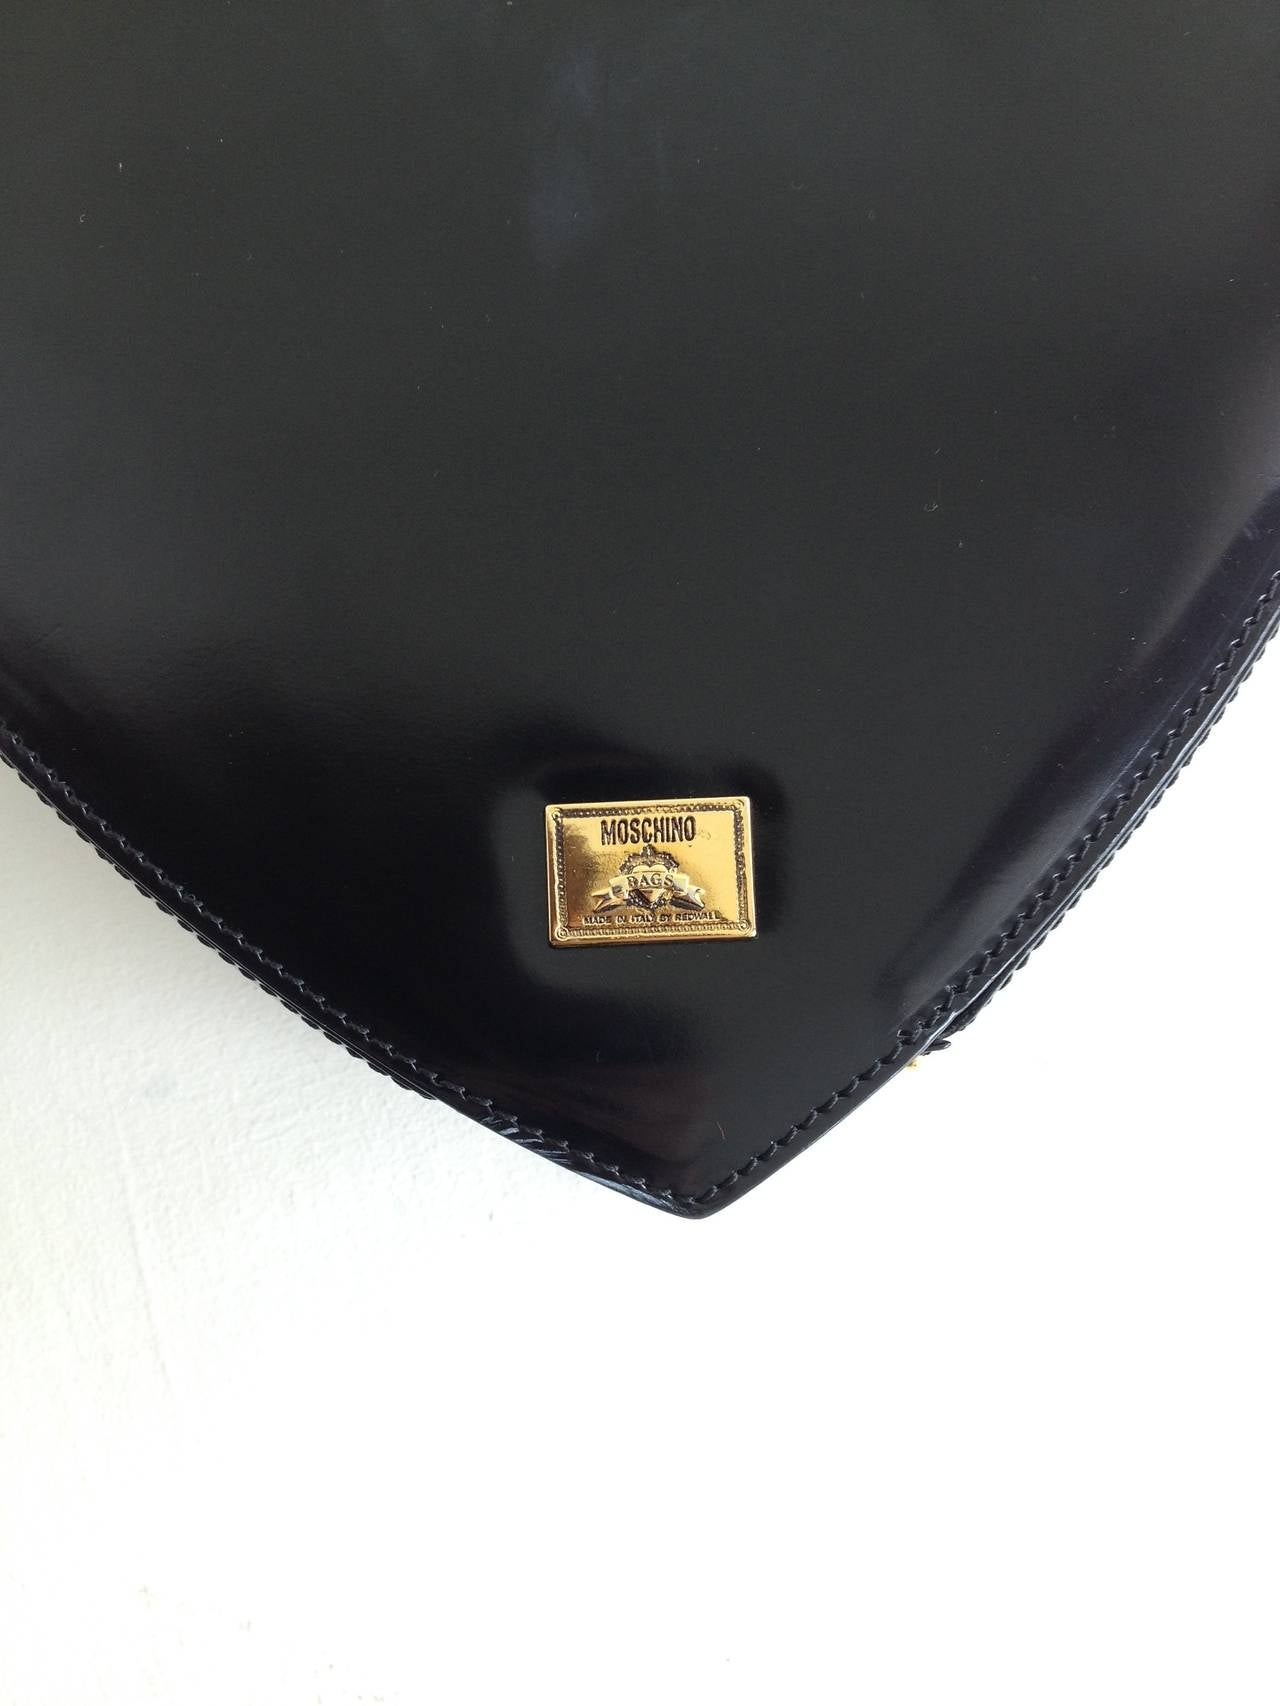 Vintage Moschino Black Leather Heart Shaped Purse at 1stdibs